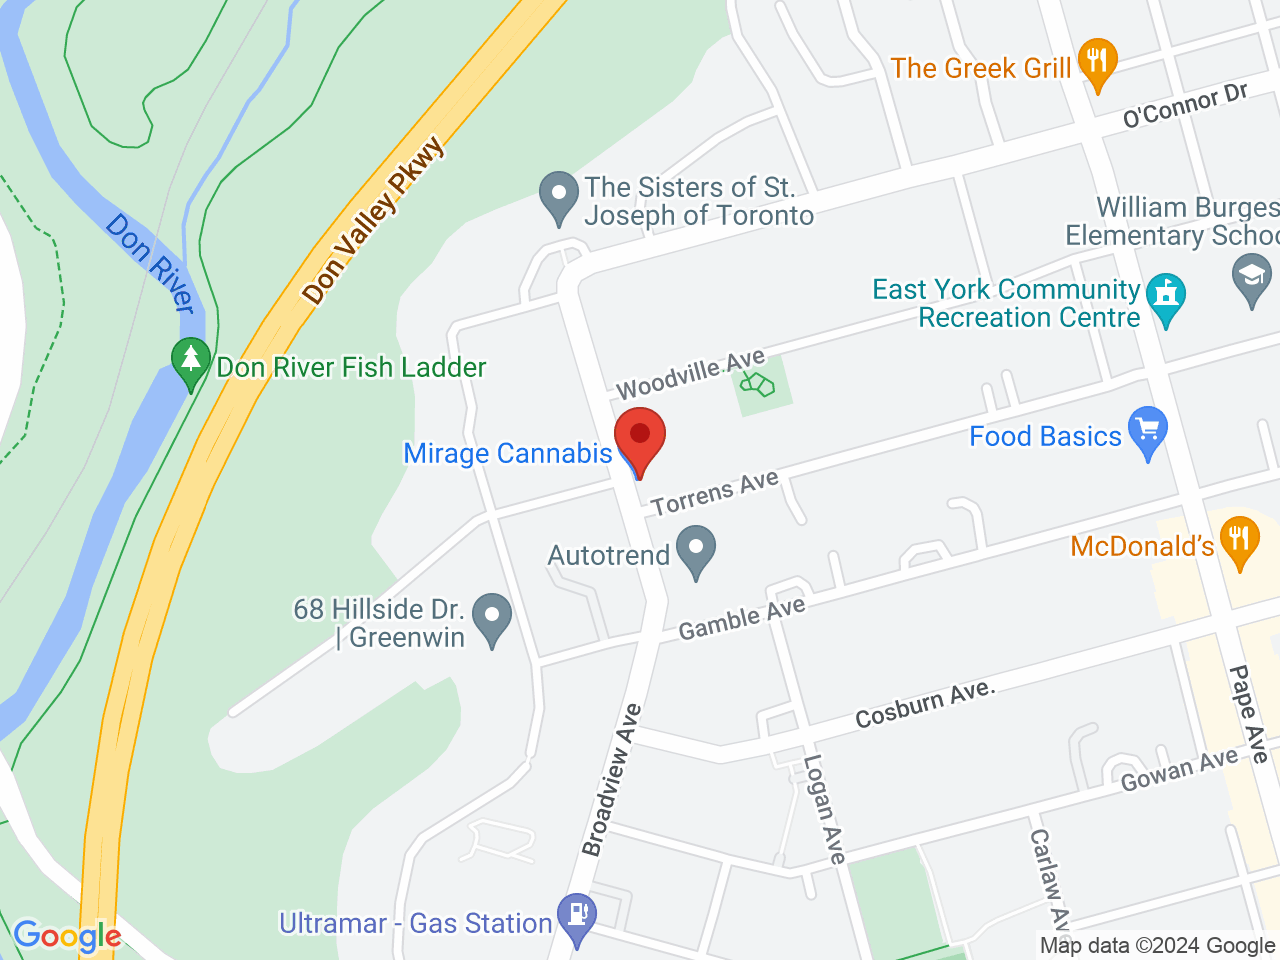 Street map for Mirage Cannabis, 1229 Broadview Ave, Toronto ON